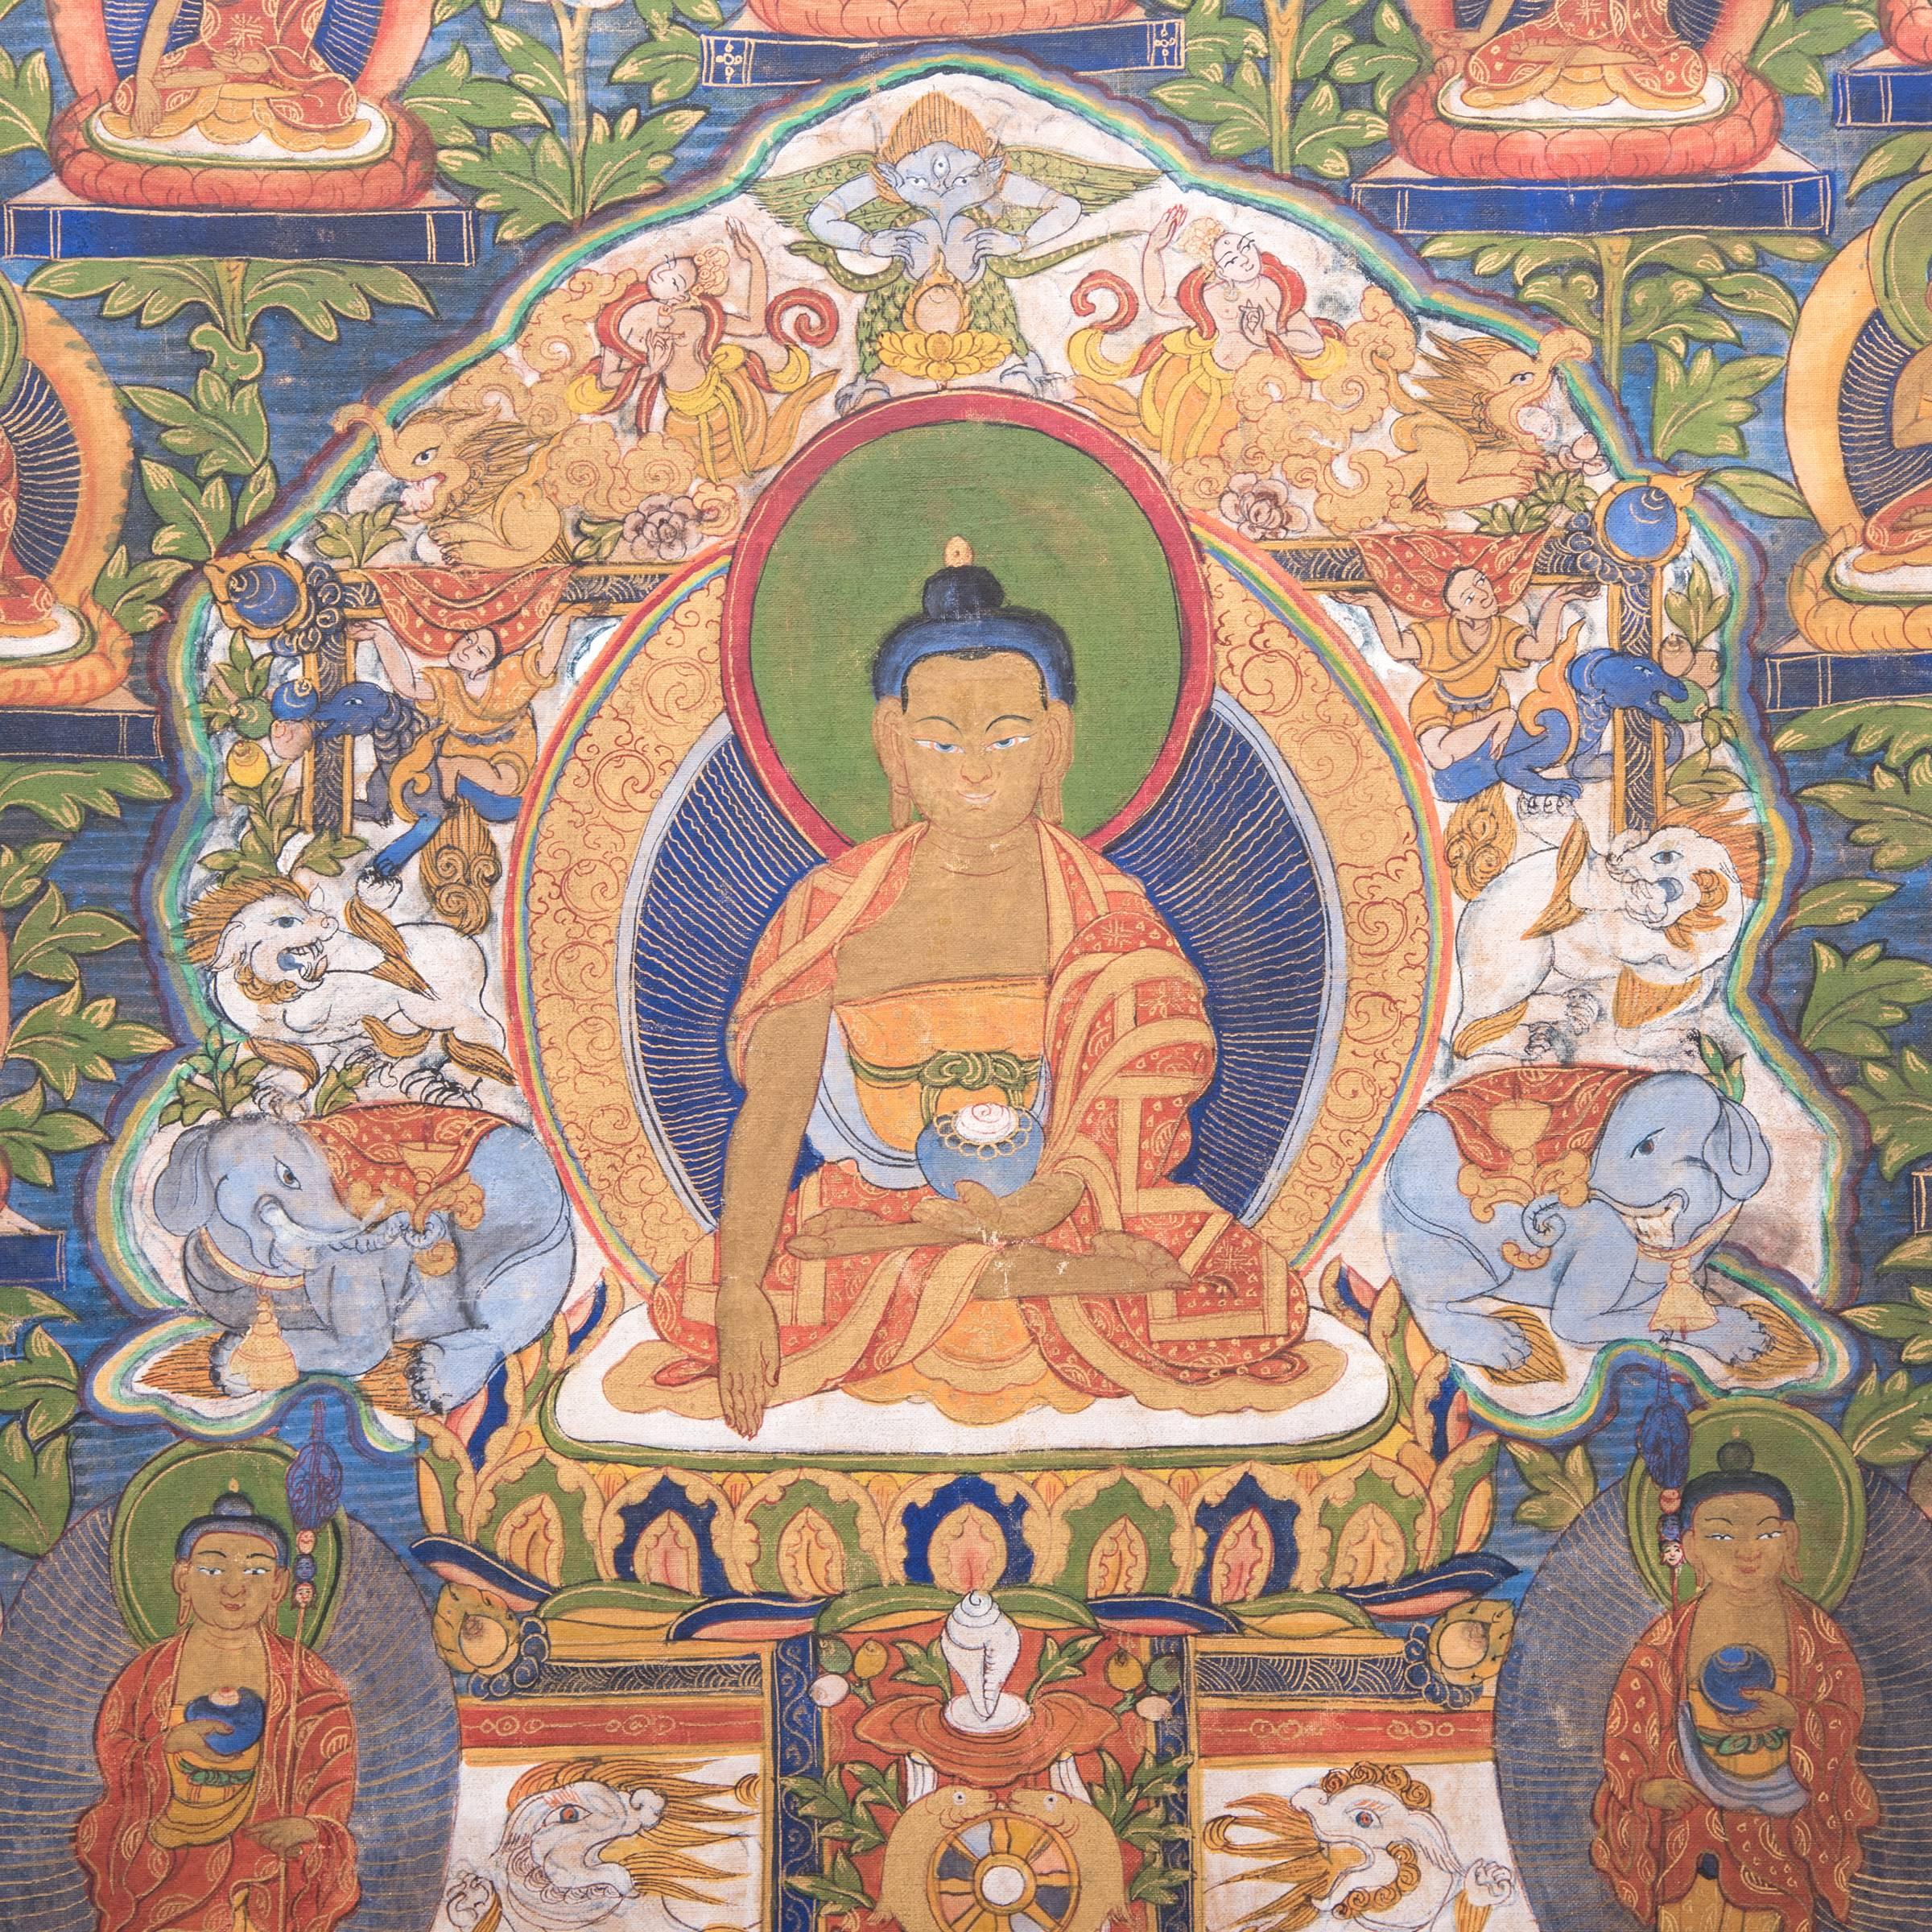 Buddhist practitioners strive for nirvana, a state in which they no longer yearn for earthly desires or temptations. In this stunningly detailed Tibetan thangka painting, we see the Buddha at rest, having left his life on earth to achieve